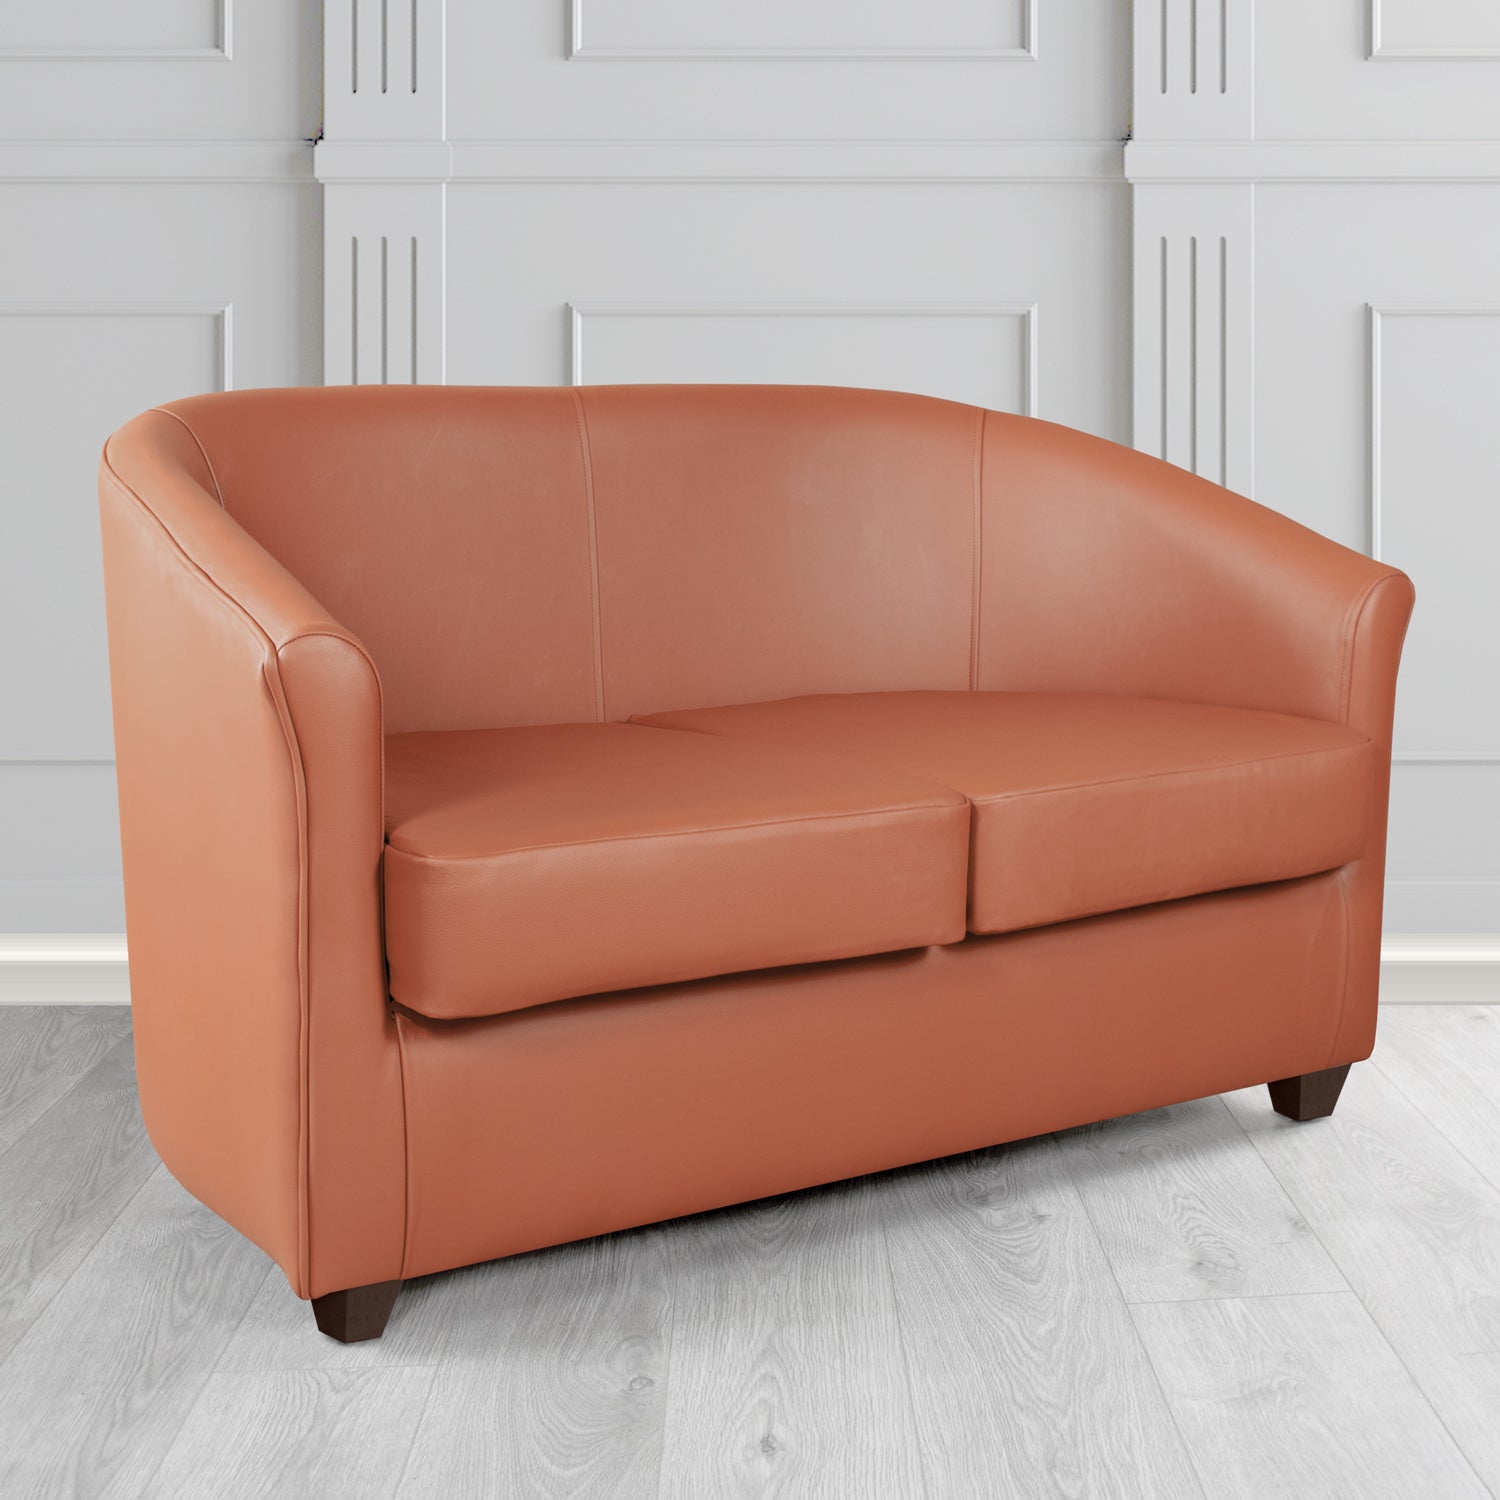 Cannes 2 Seater Tub Sofa in Just Colour Rusty Crib 5 Faux Leather - The Tub Chair Shop